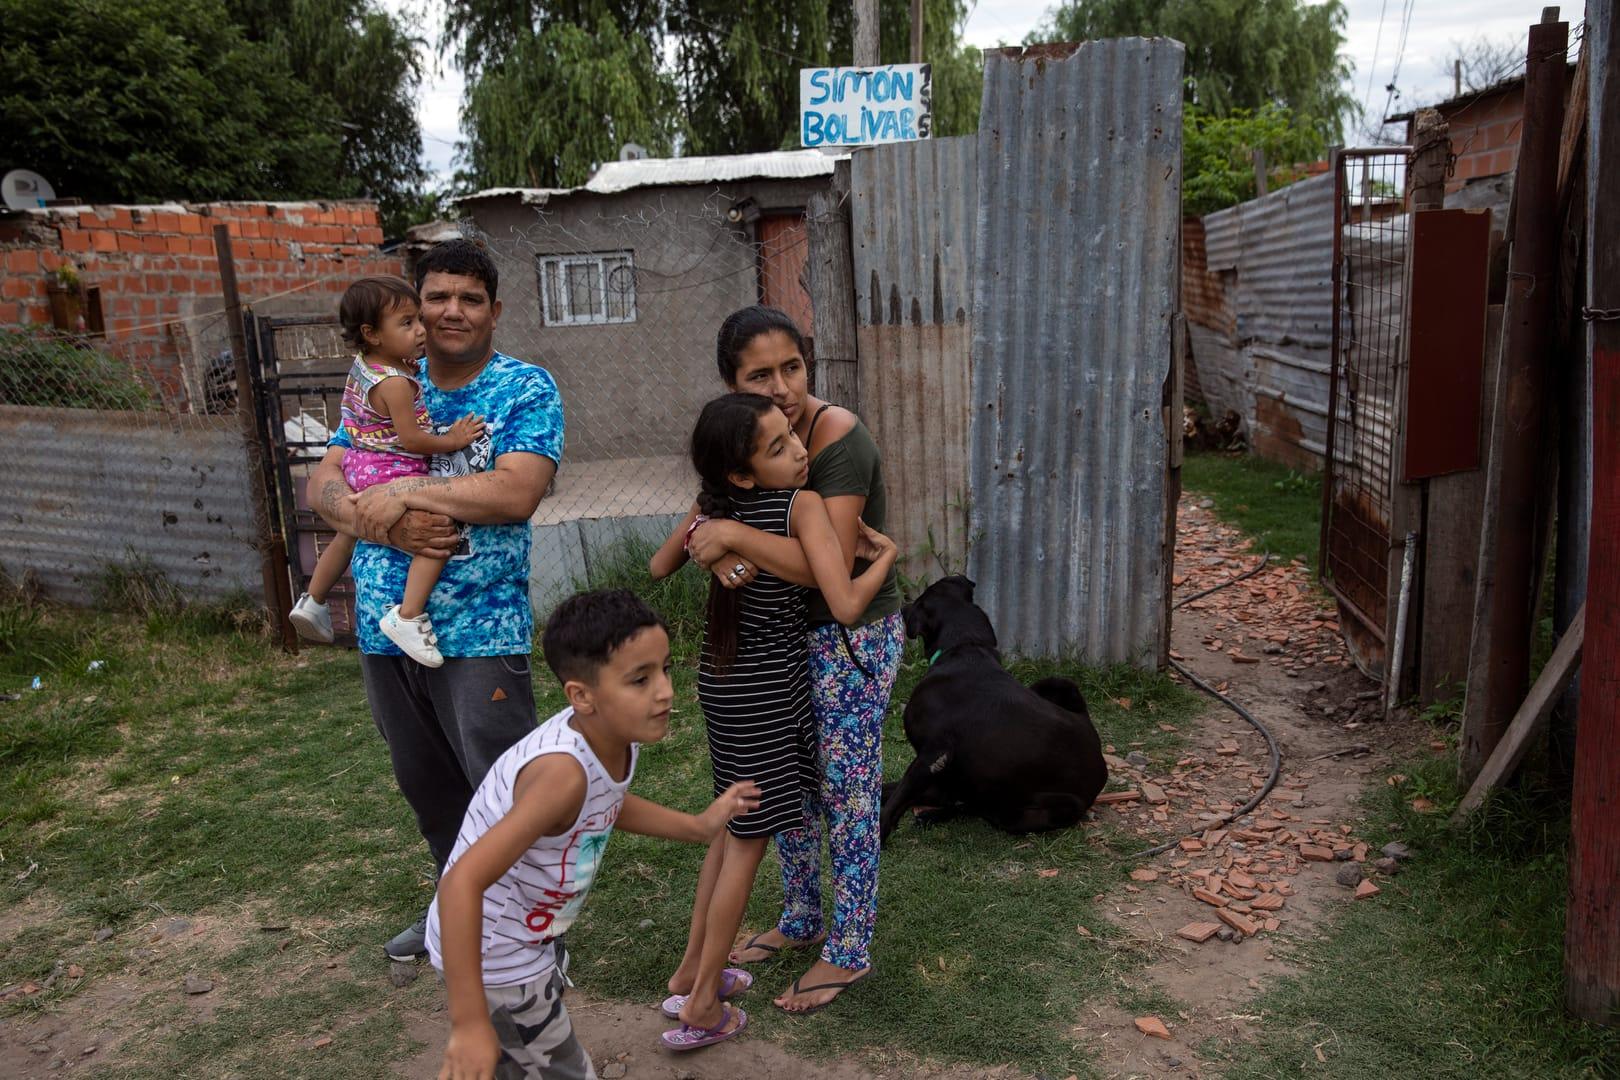 Church offers new x-ray of chronic poverty in Pope’s native Argentina